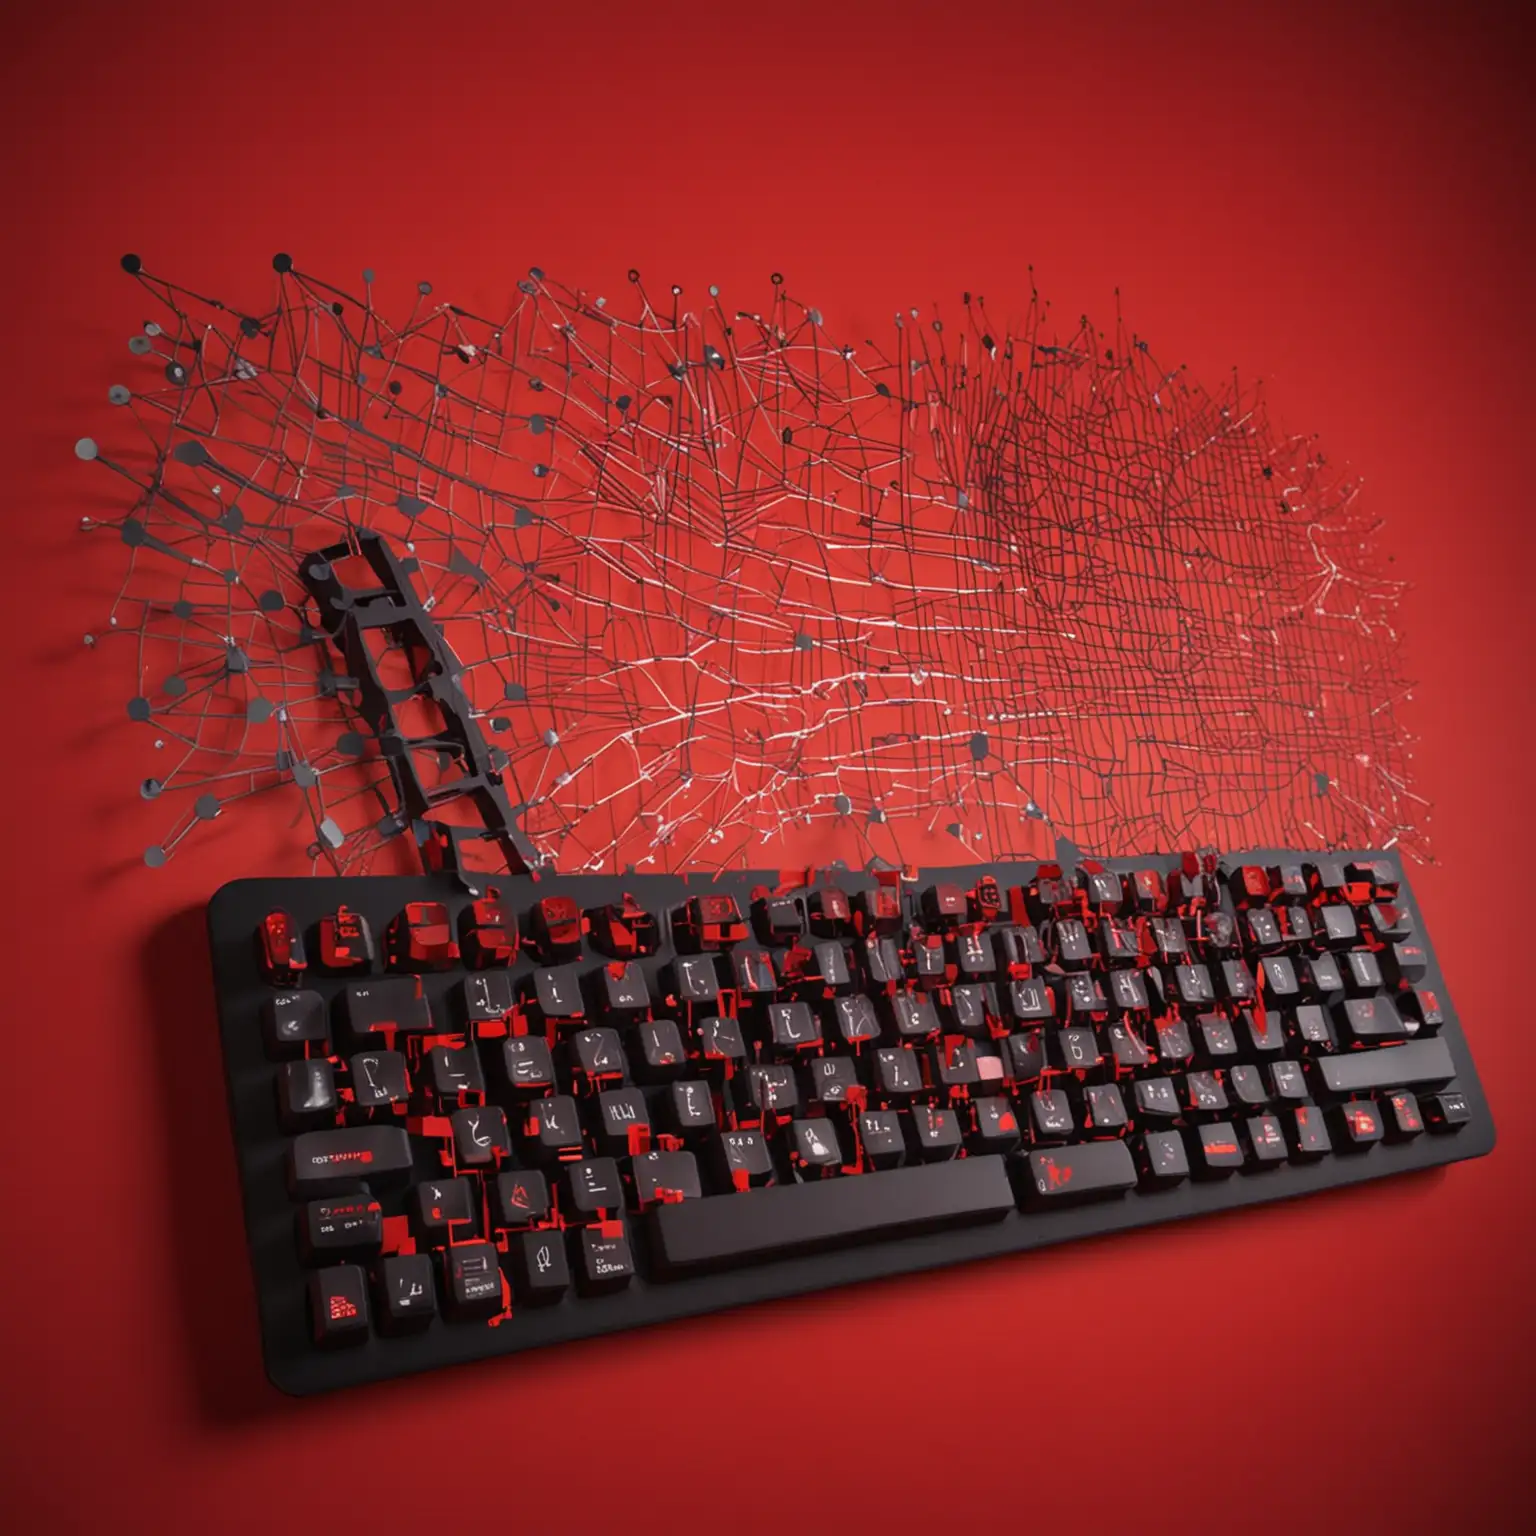 create a graphic with the silhouette of a world wide web icon, with a keyboard on an abstract-technological red background
